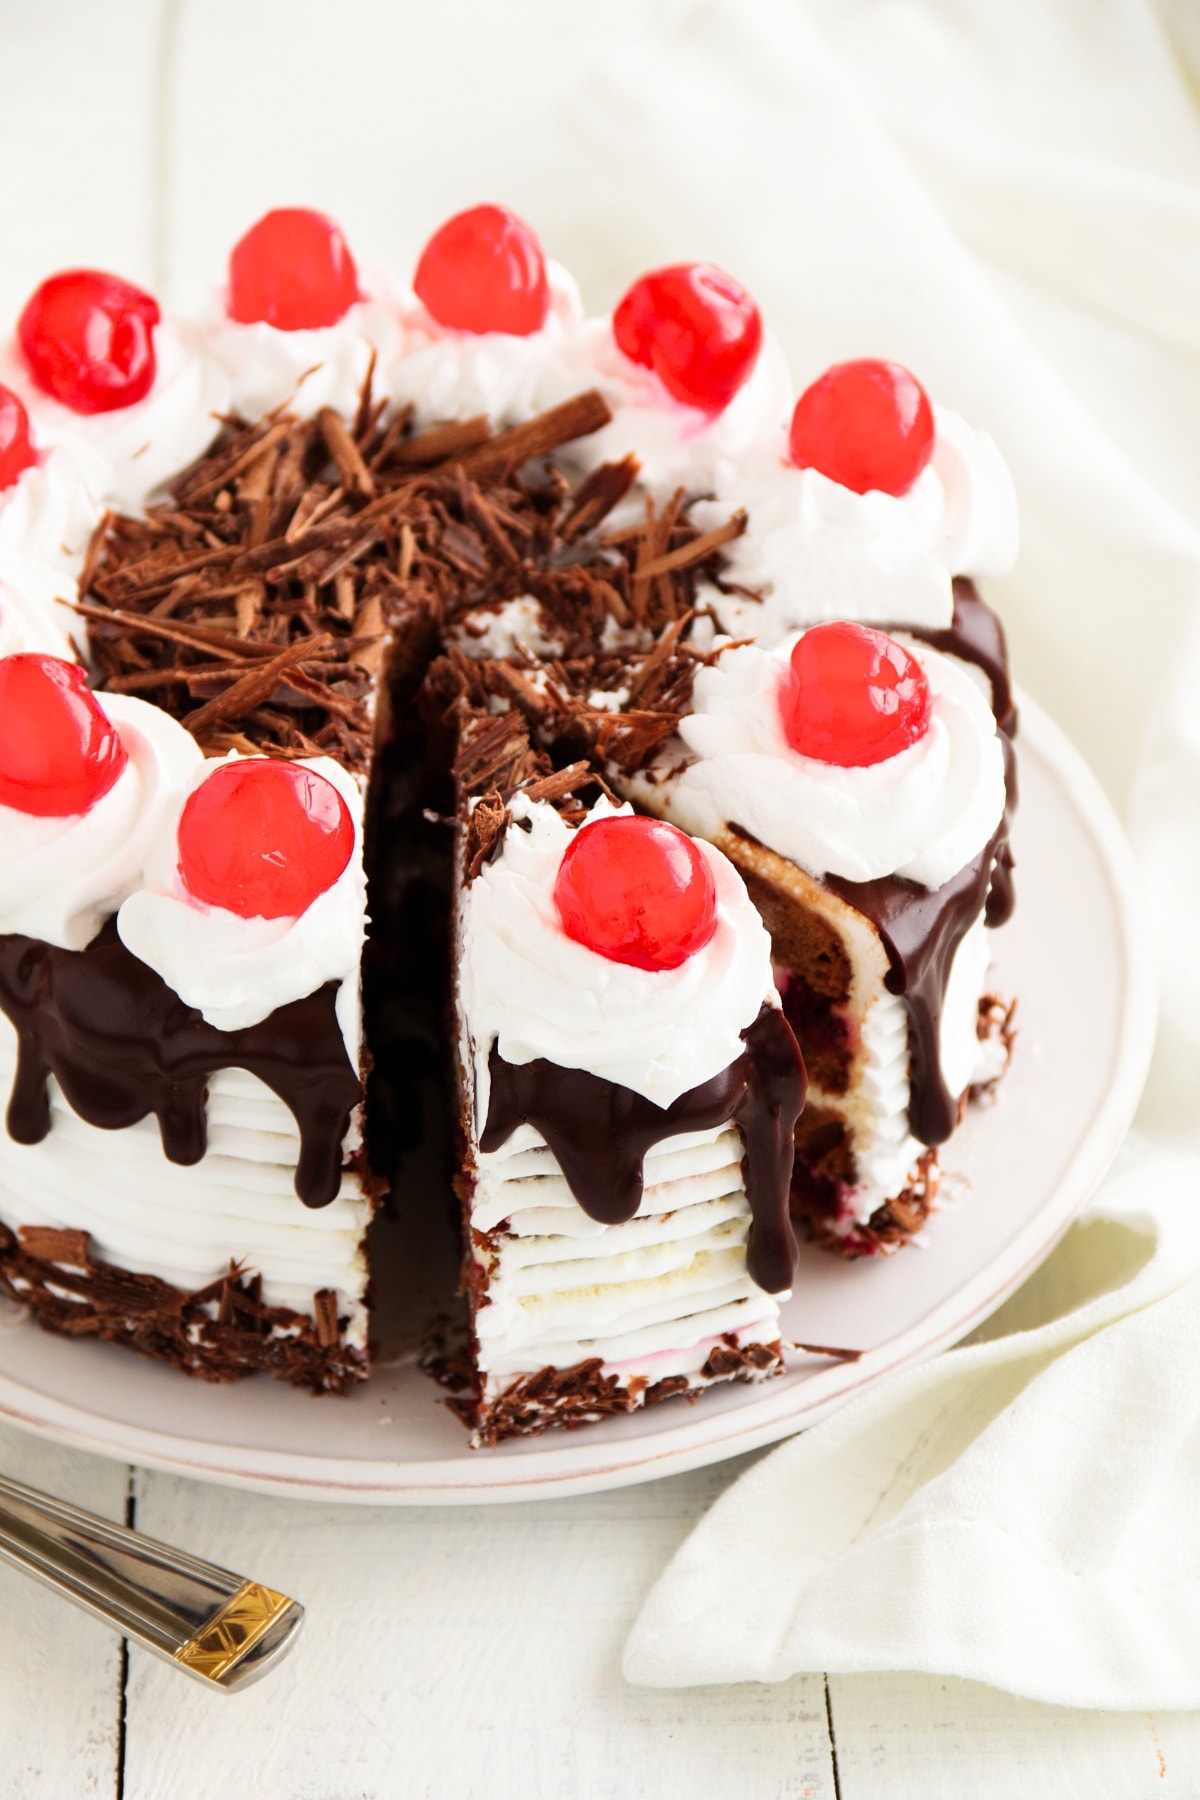 30 Best Cake Flavors To Try (+ Easy Recipes) featuring Sweet Homemade Black Forest Cake with Fresh Cherries